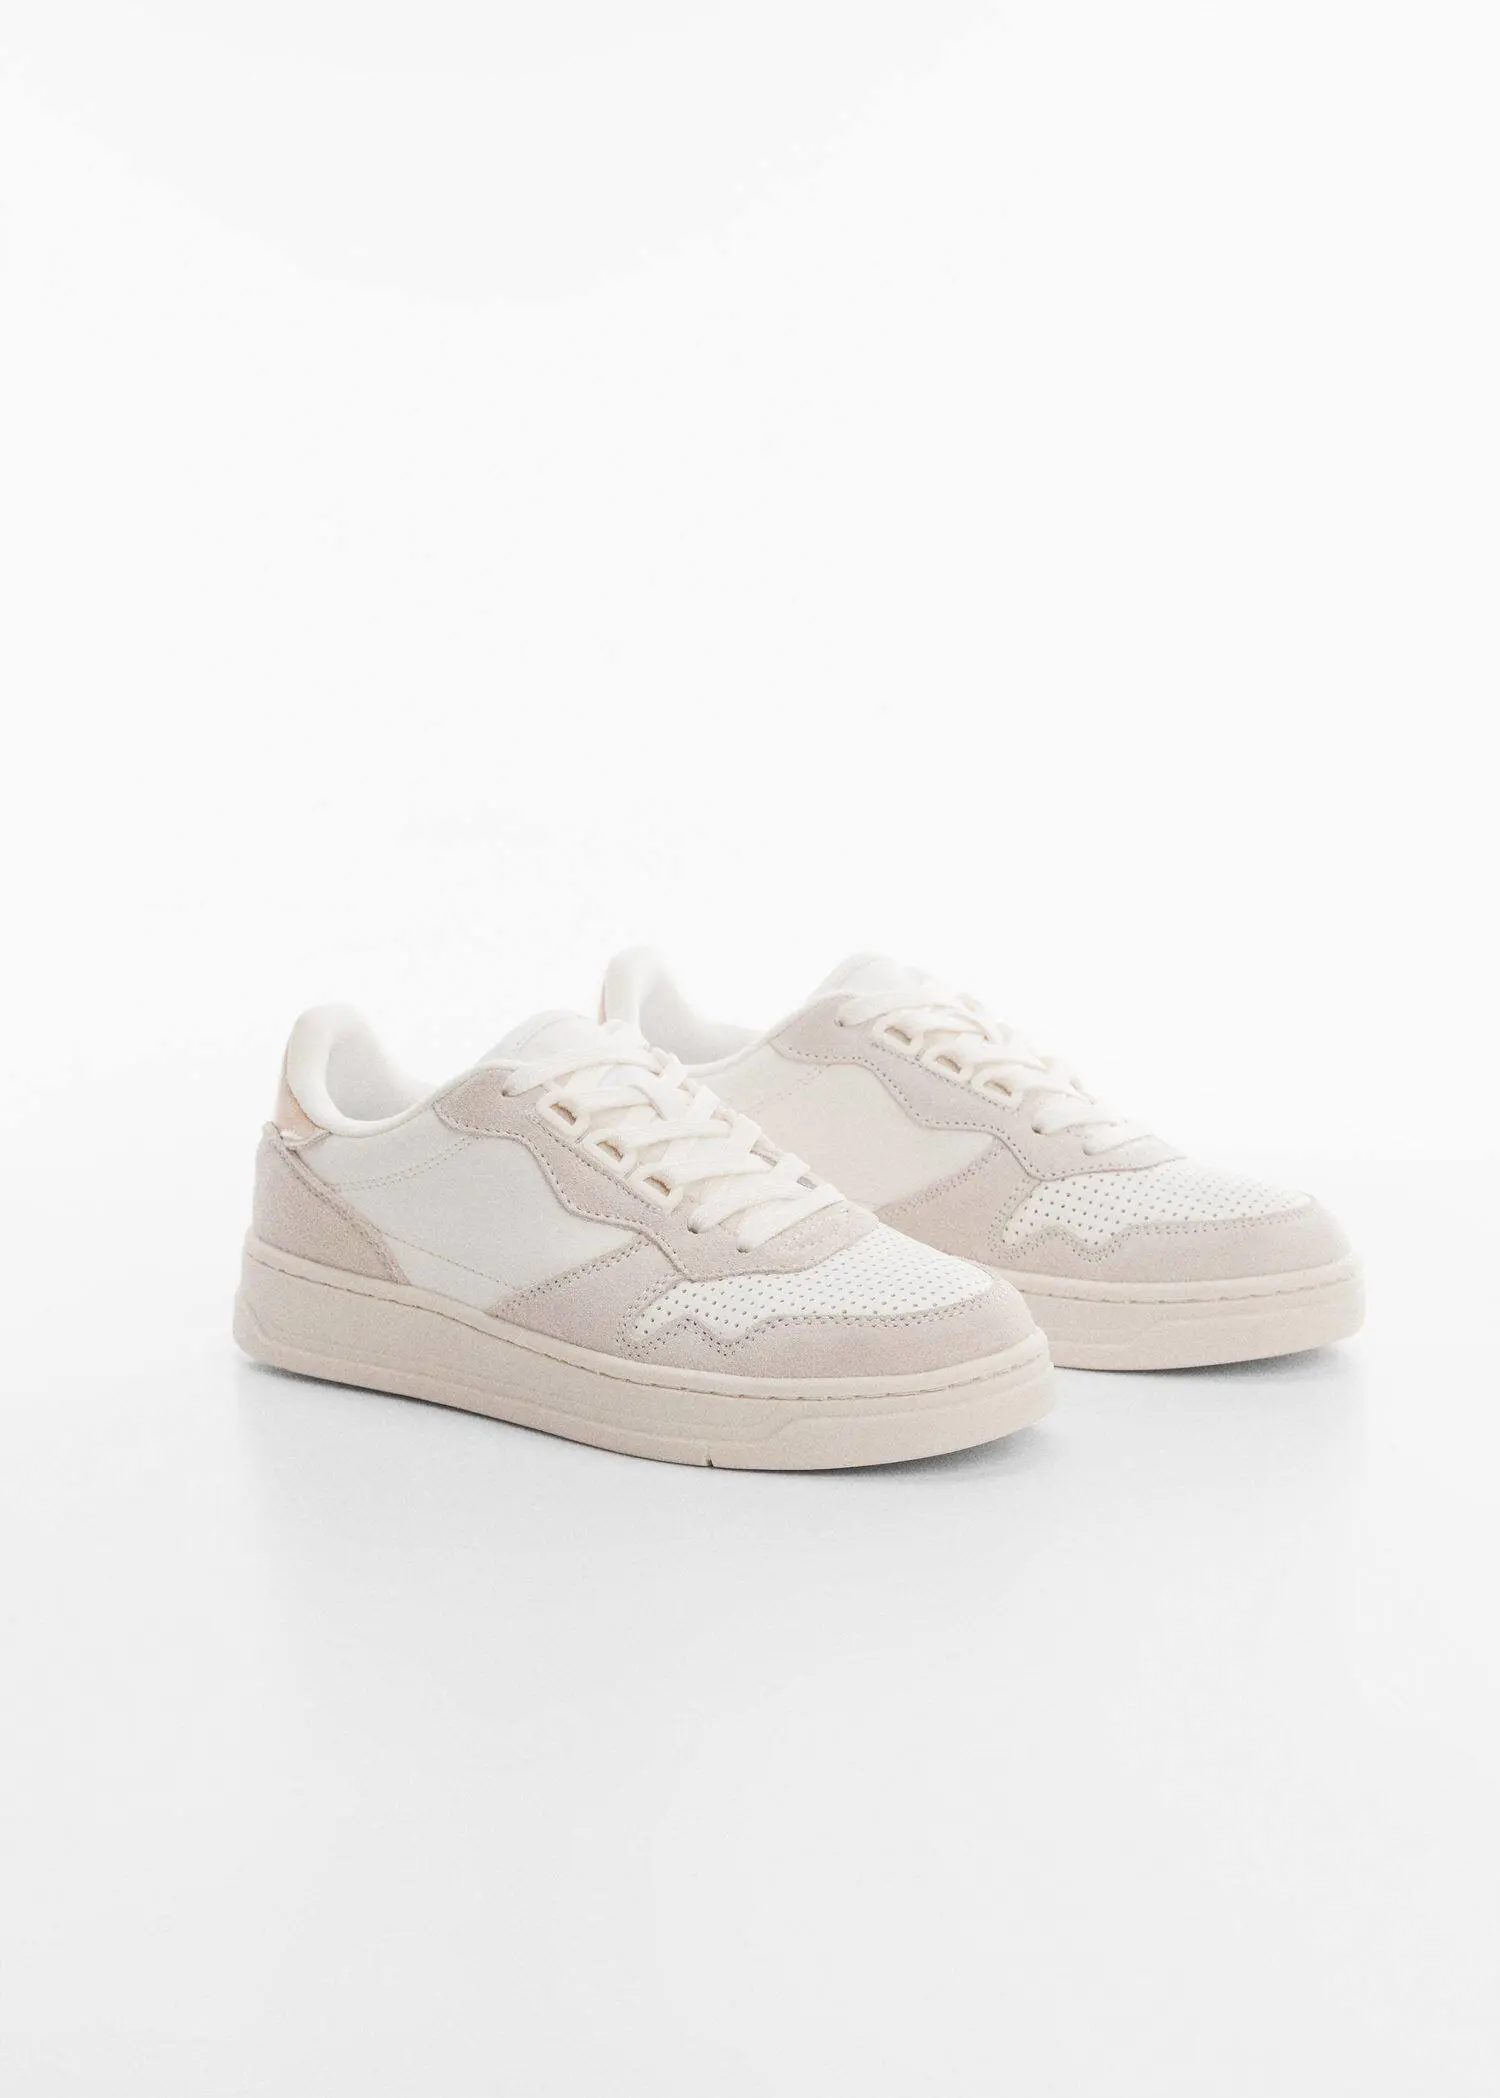 Mango Panels leather sneakers. a pair of white sneakers on top of a white surface. 